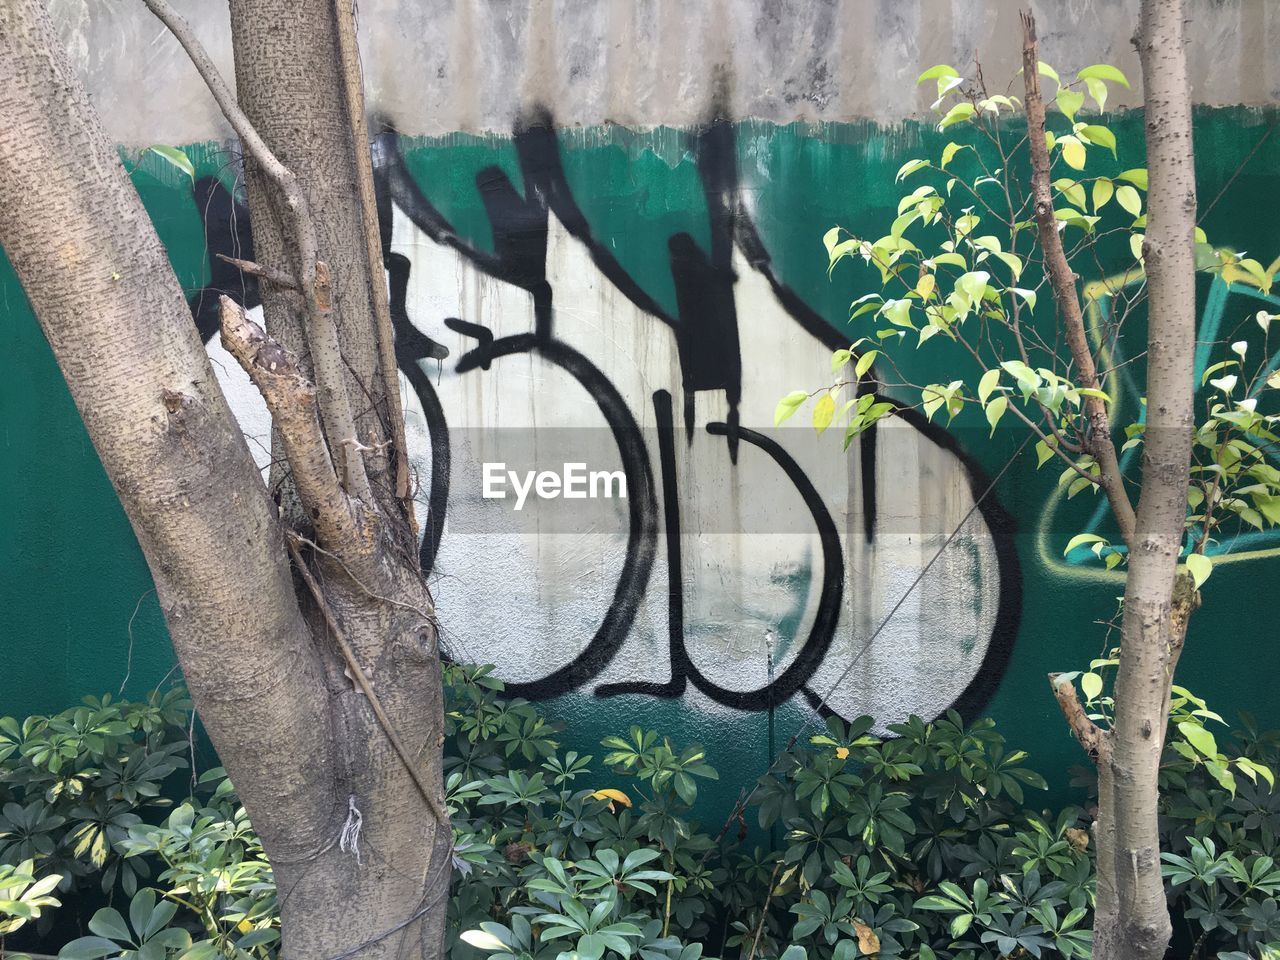 Trees and plants against graffiti on wall